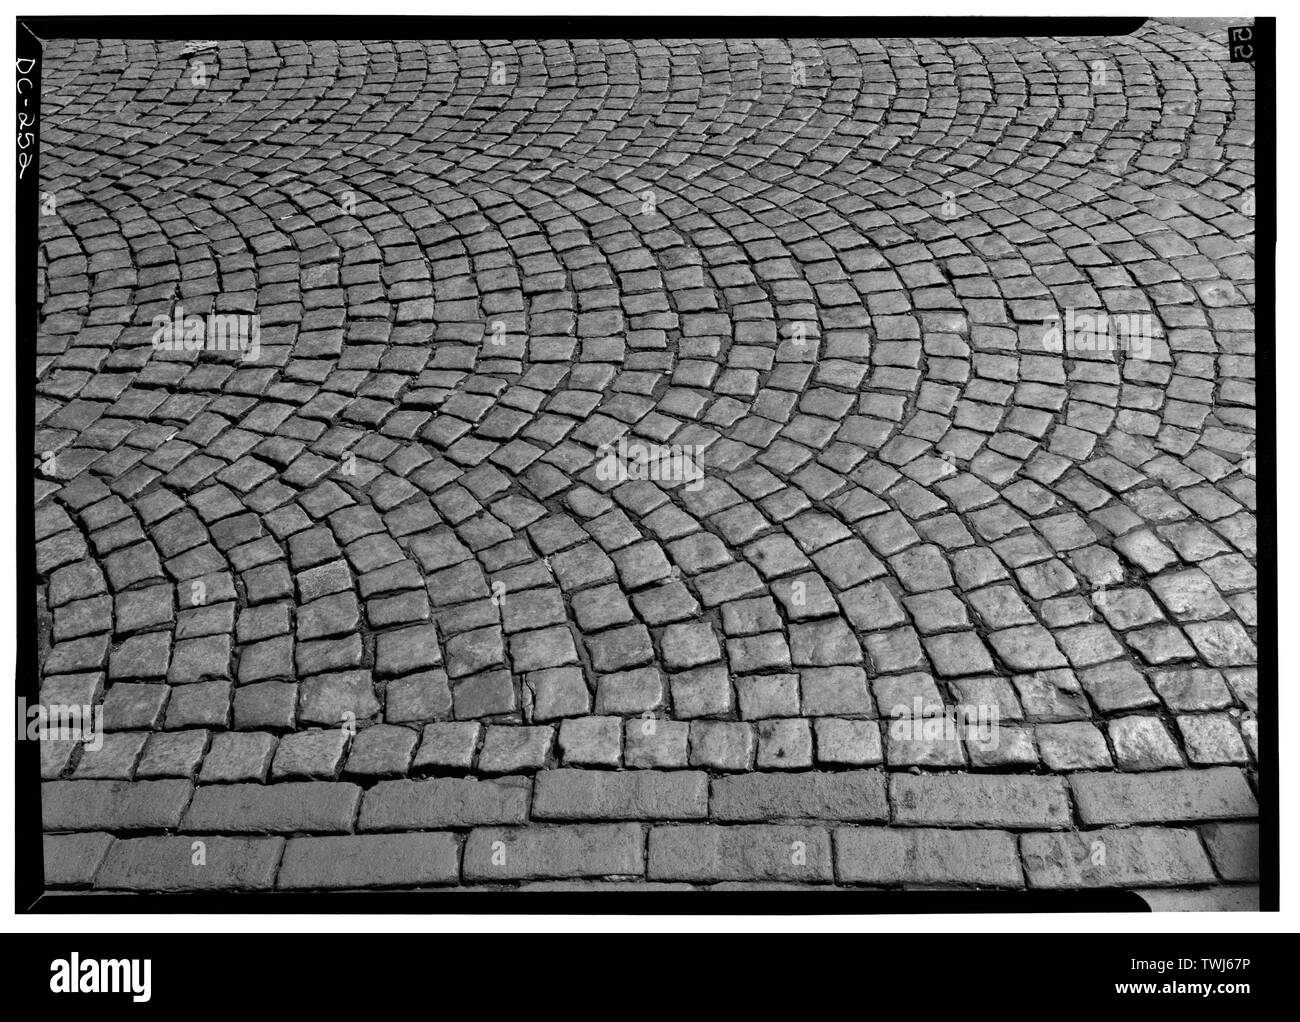 September 1969 PAVING STONES, M AND BANK STREET, LOOKING SOUTH - Georgetown Street Furniture, Georgetown Vicinity, Washington, District of Columbia, DC Stock Photo